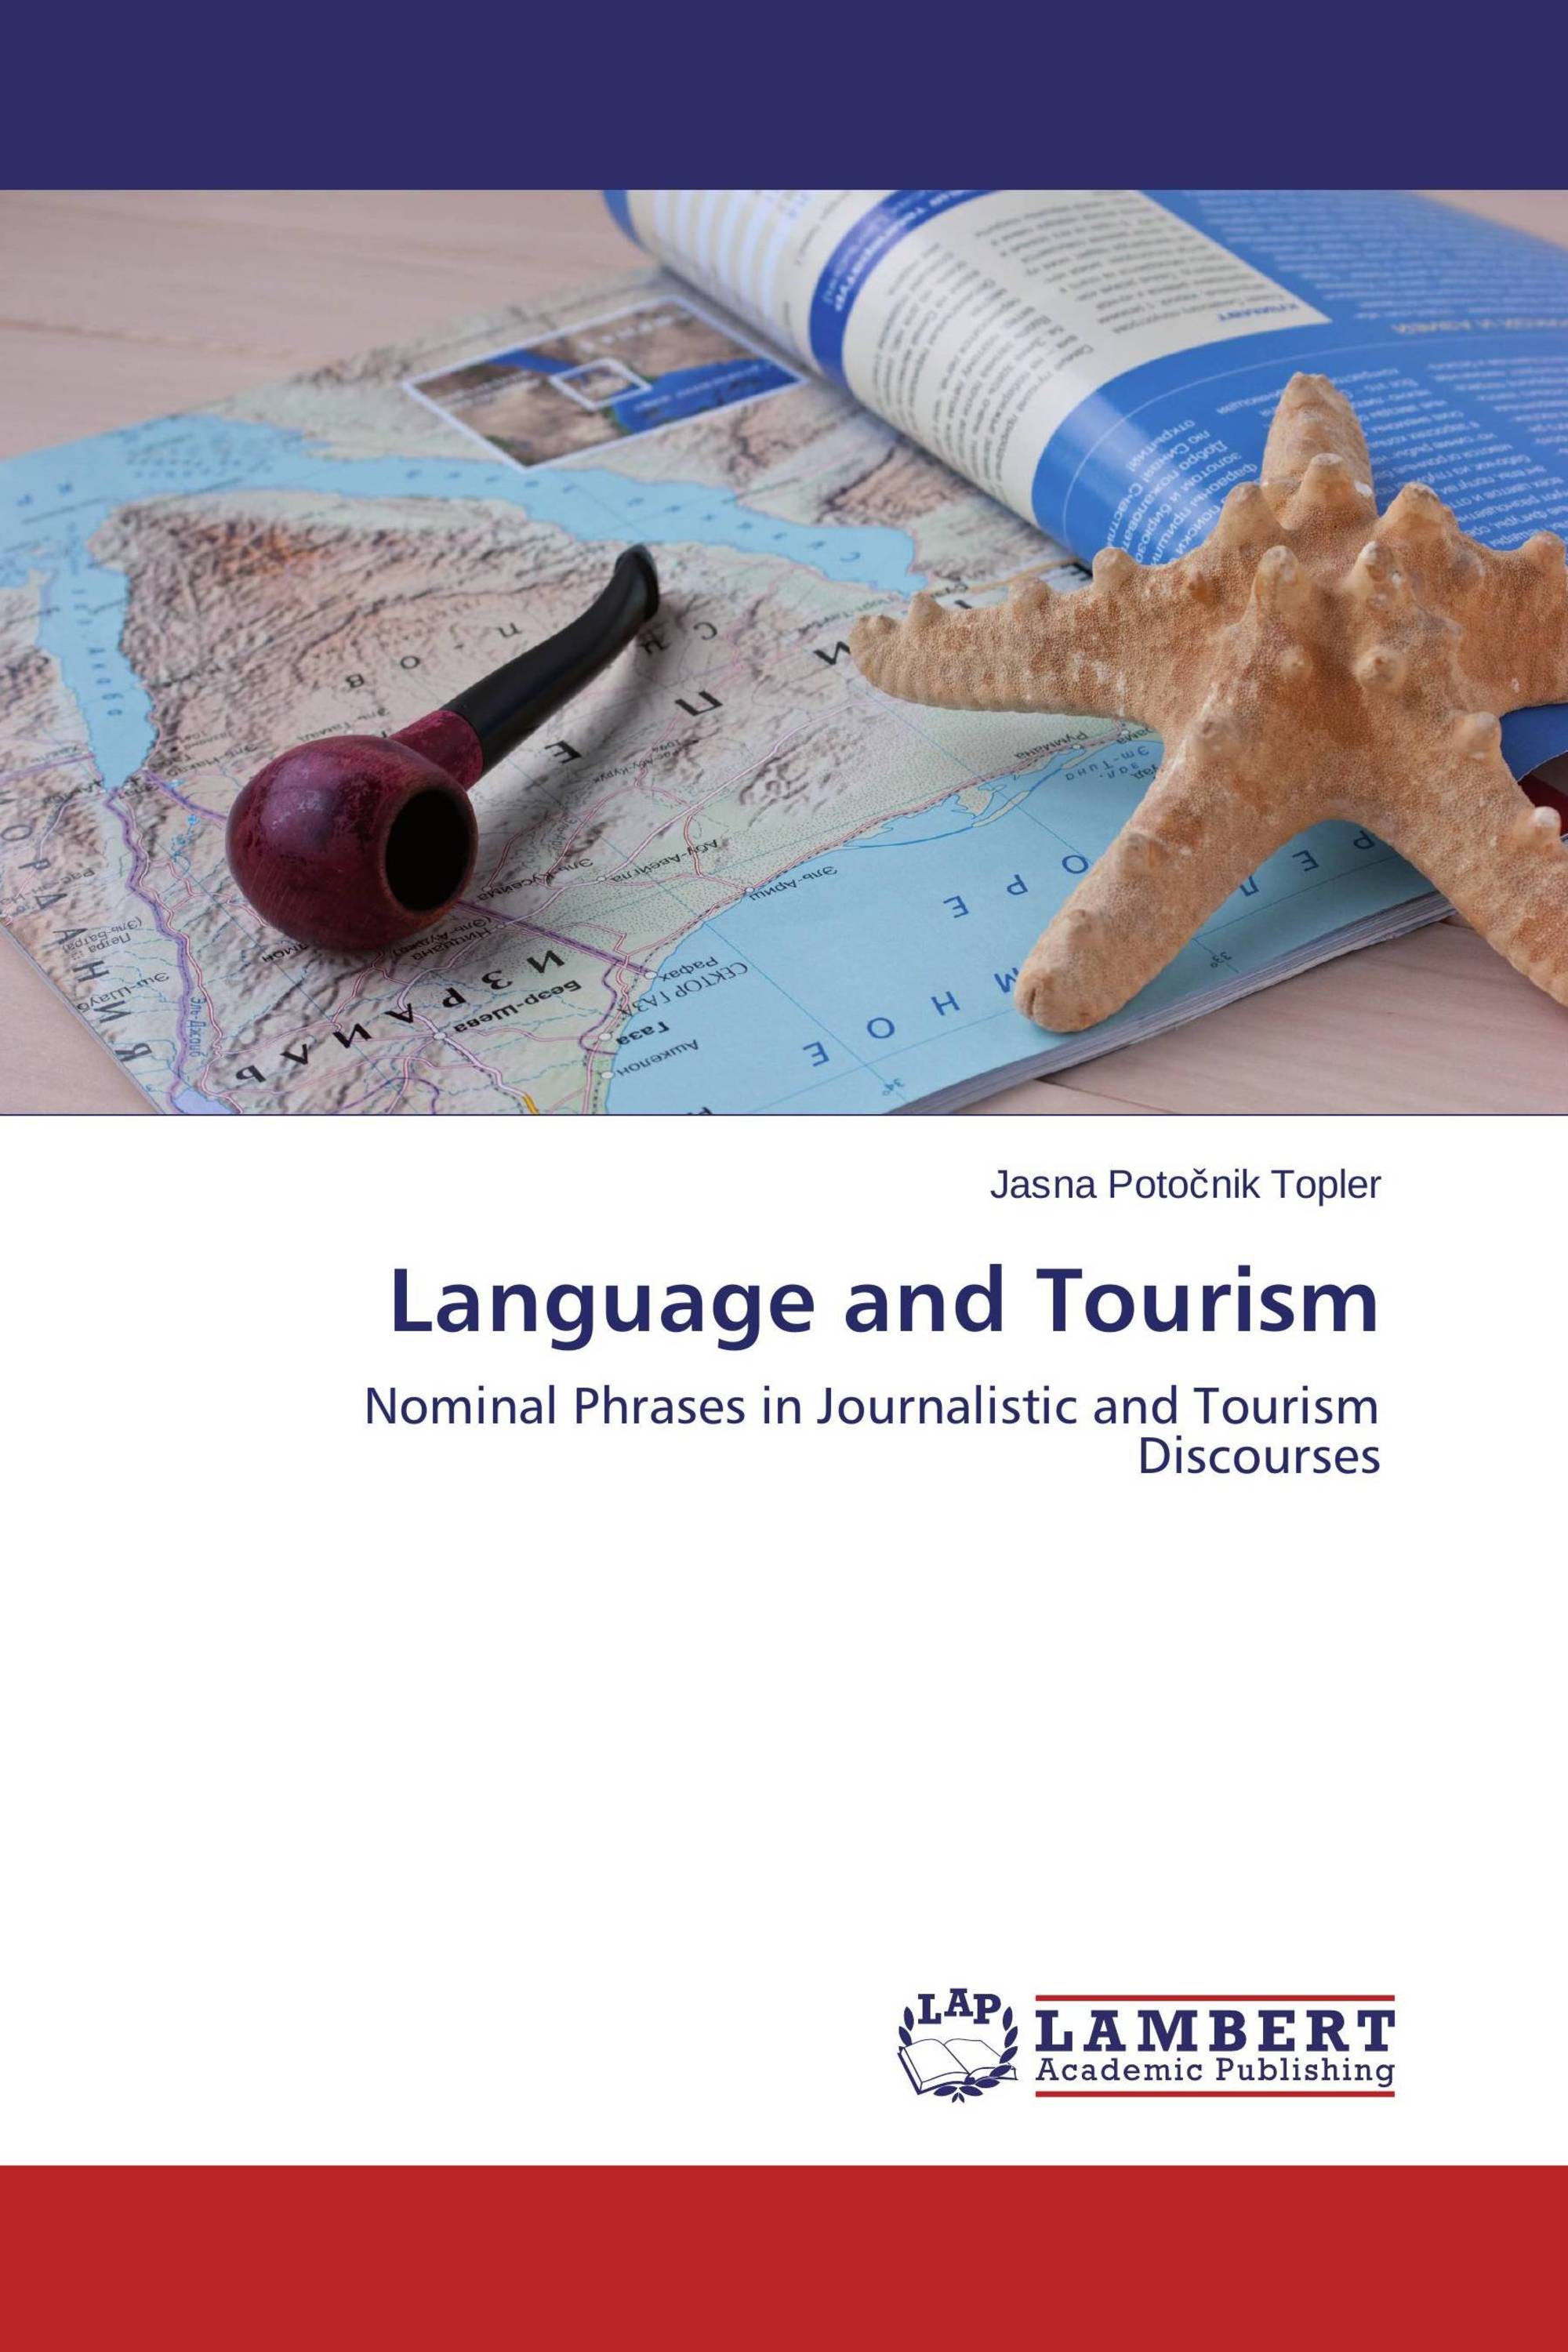 another language for tourism